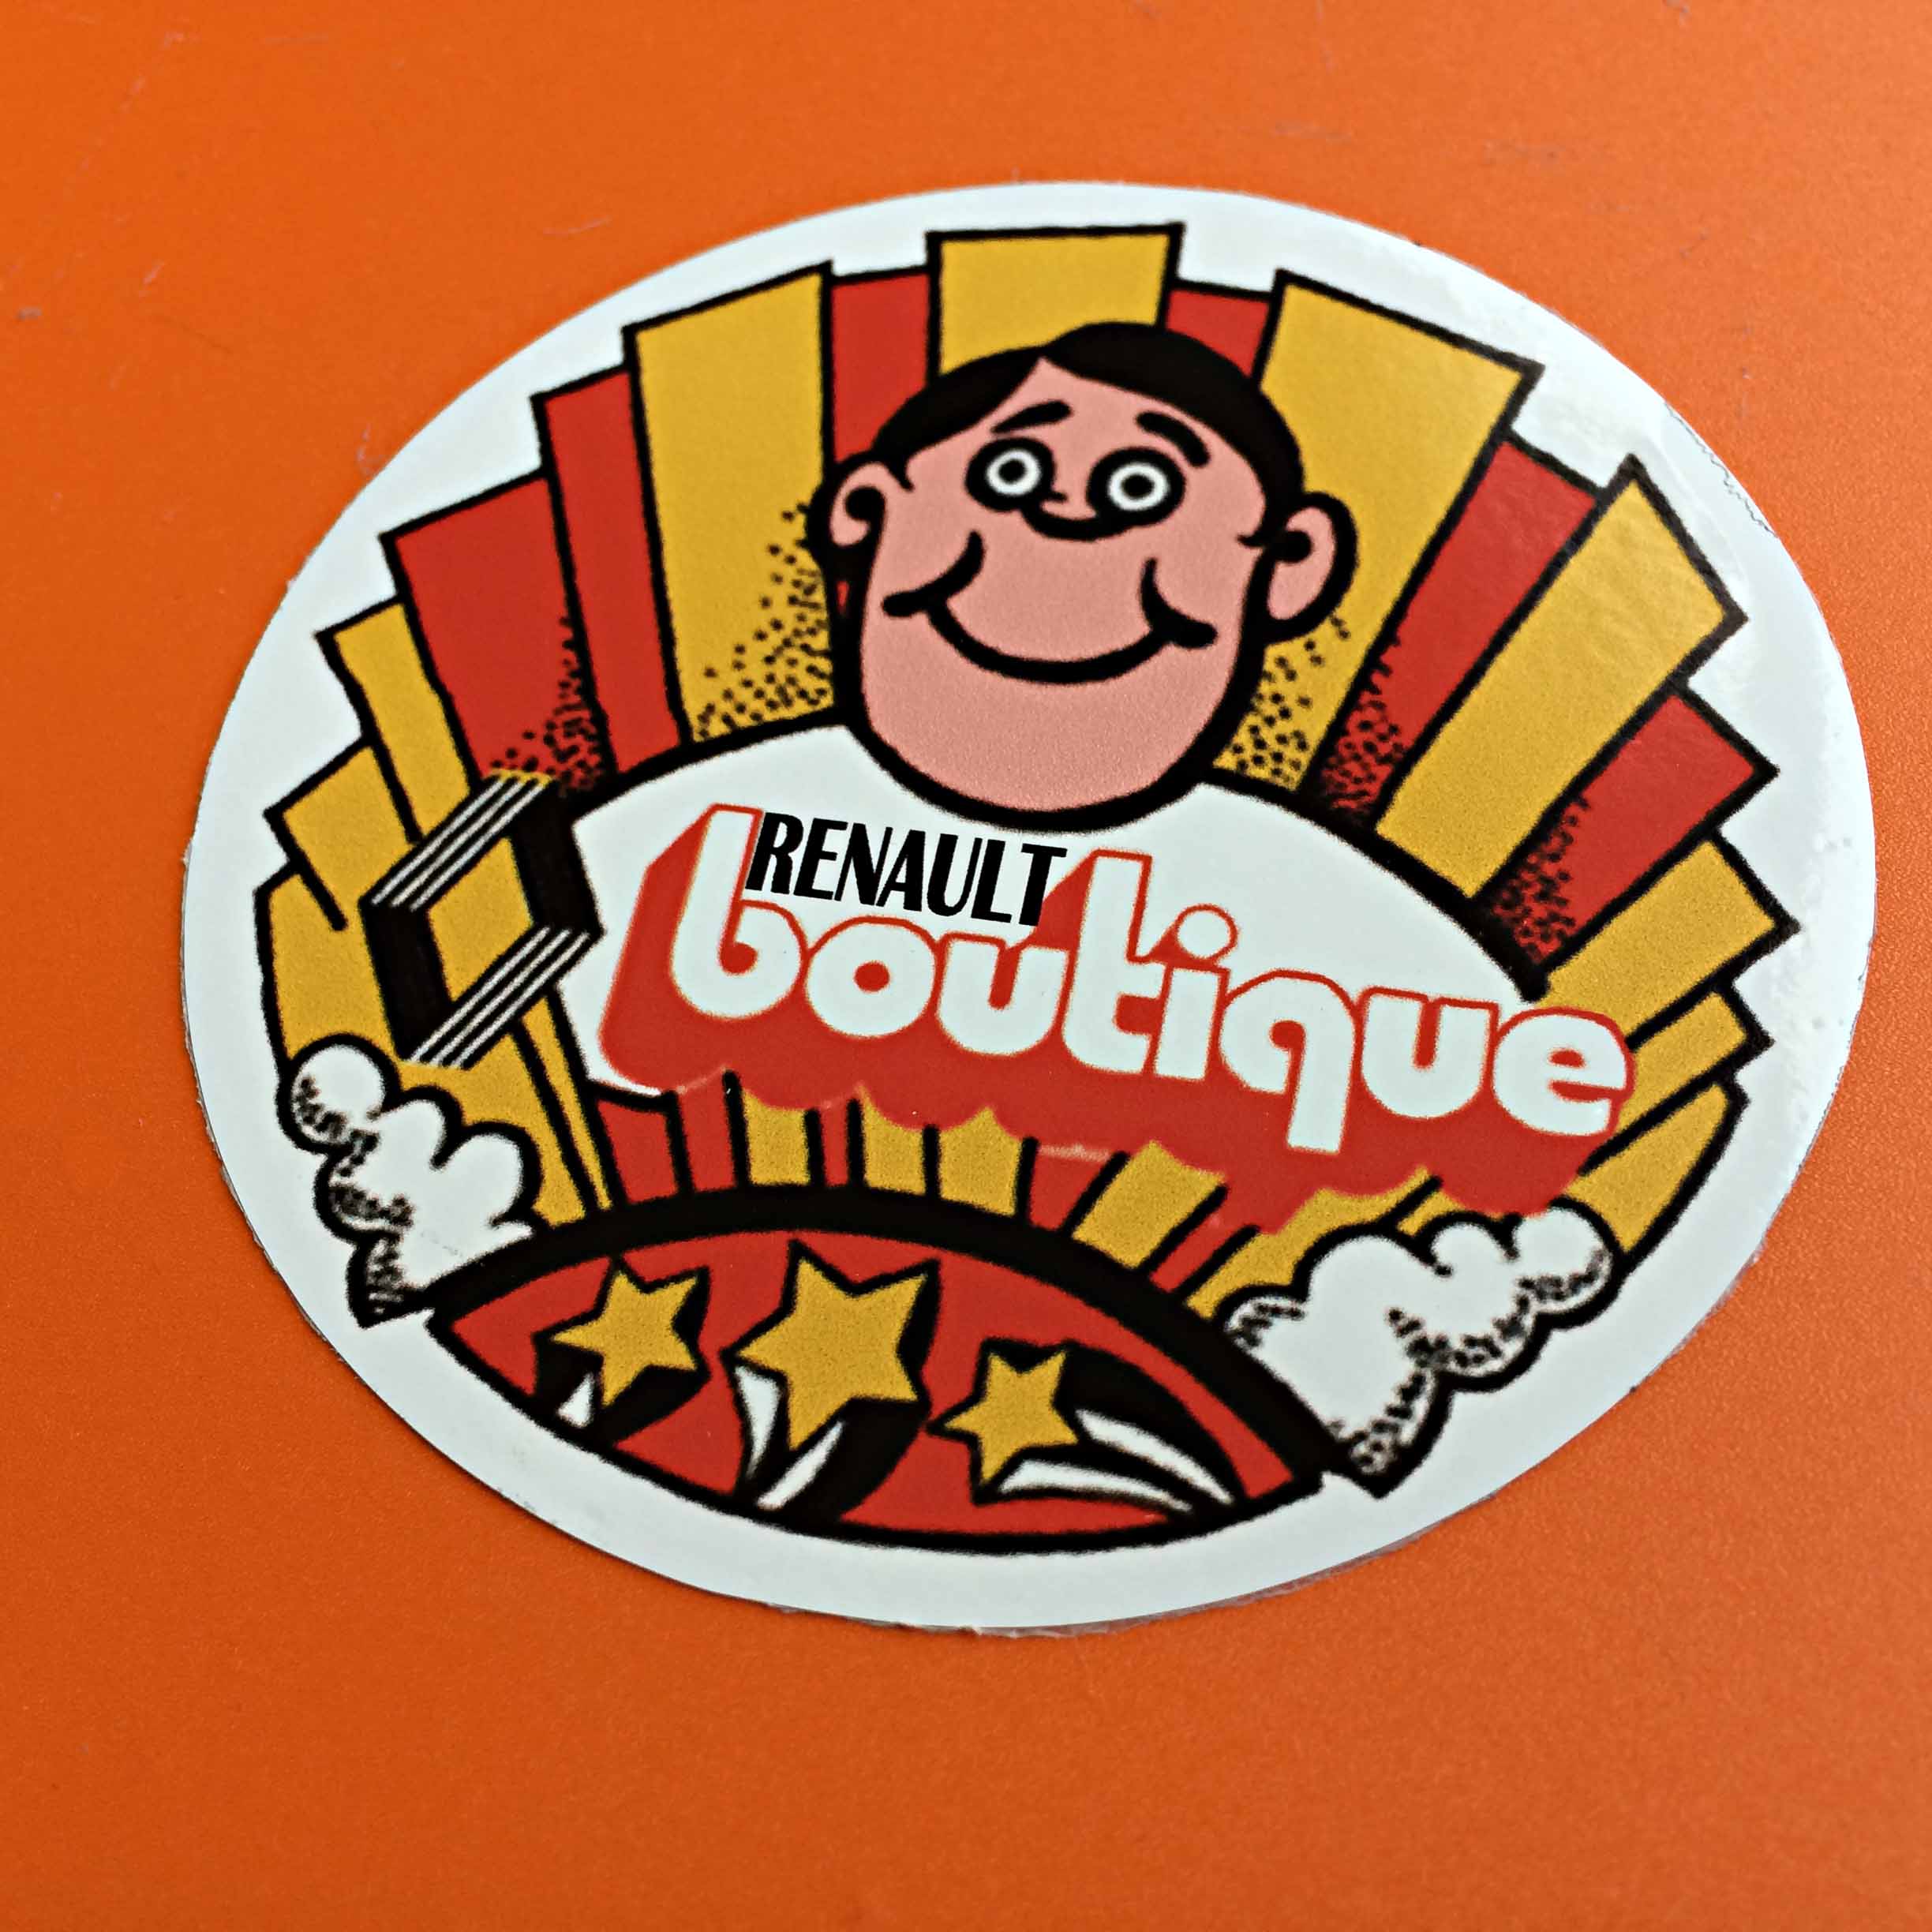 RENAULT BOUTIQUE STICKER. A man with black hair smiling and wearing a white jumper with Renault boutique retro lettering and logo across it. Red and yellow columns of colour and three shooting stars surround the image.